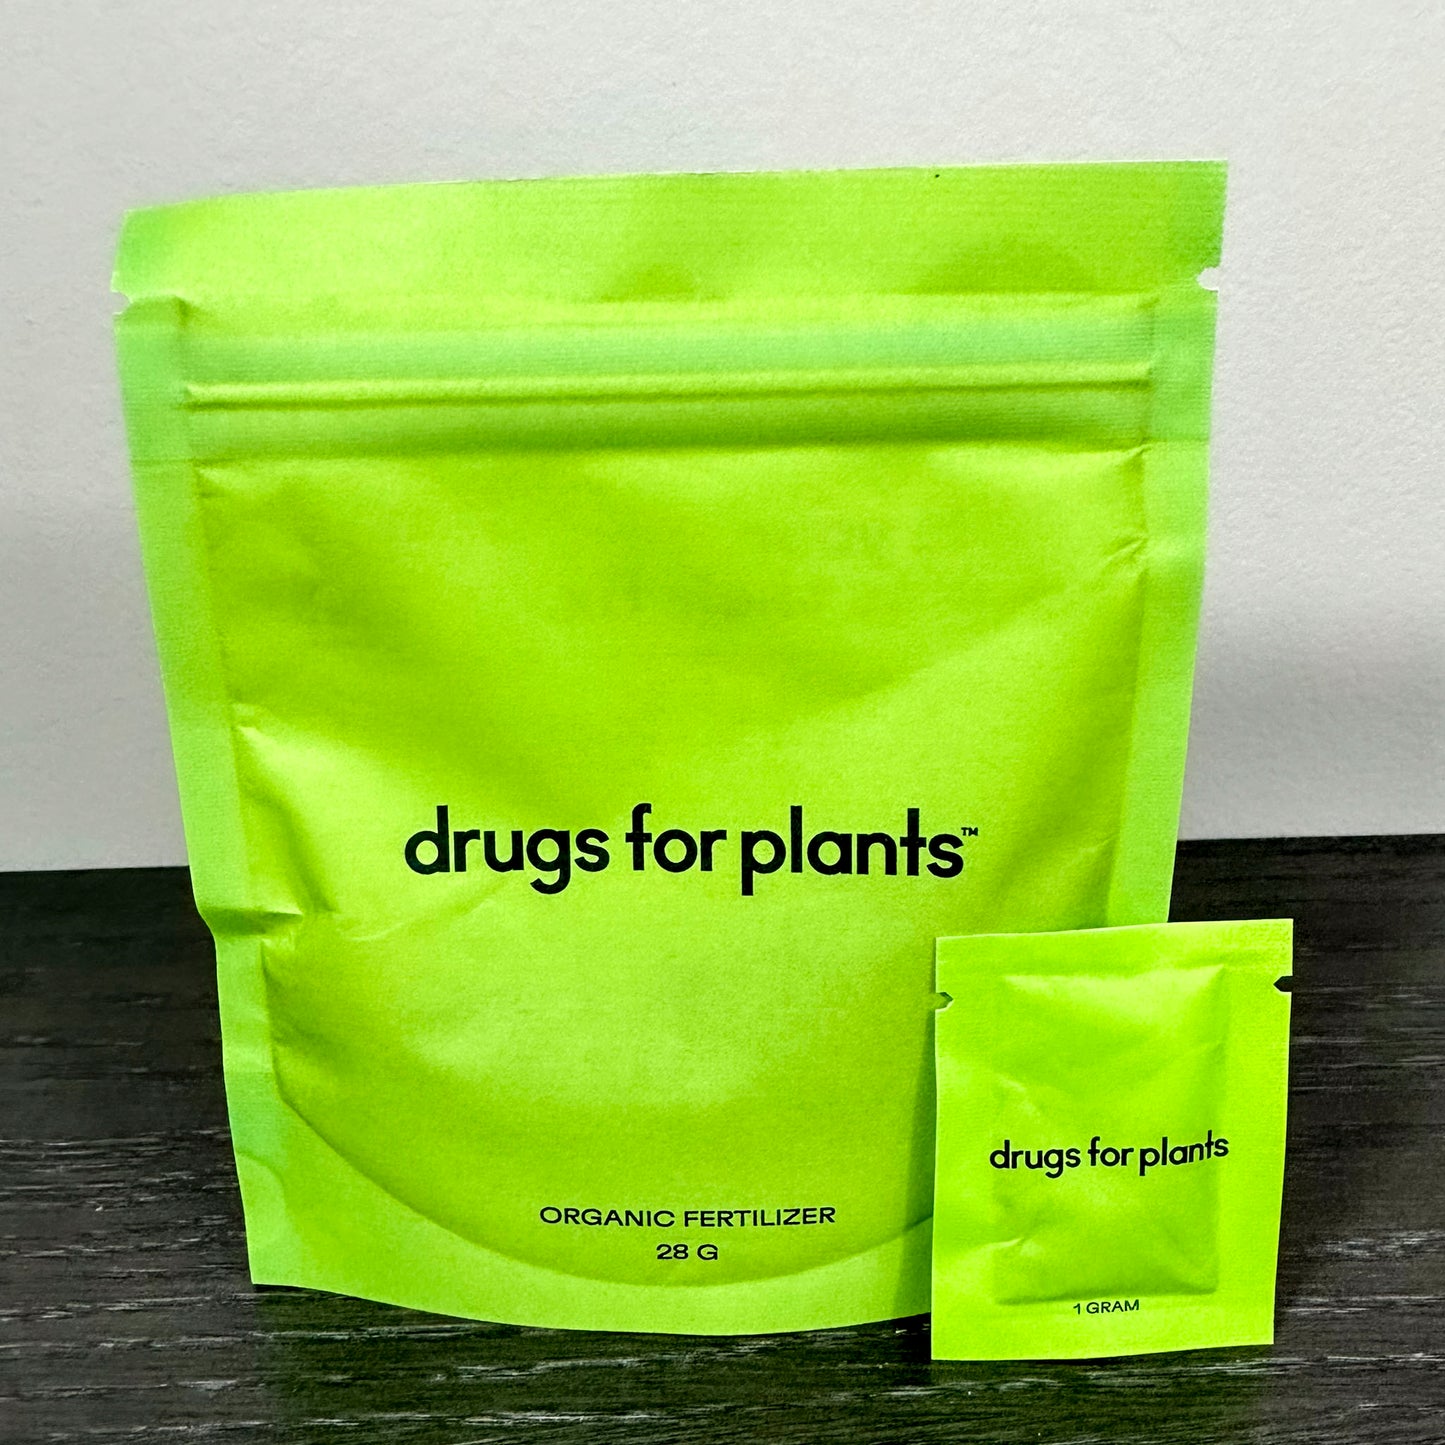 Drugs for plants pouch of fertilizer 28 gram and 1 gram